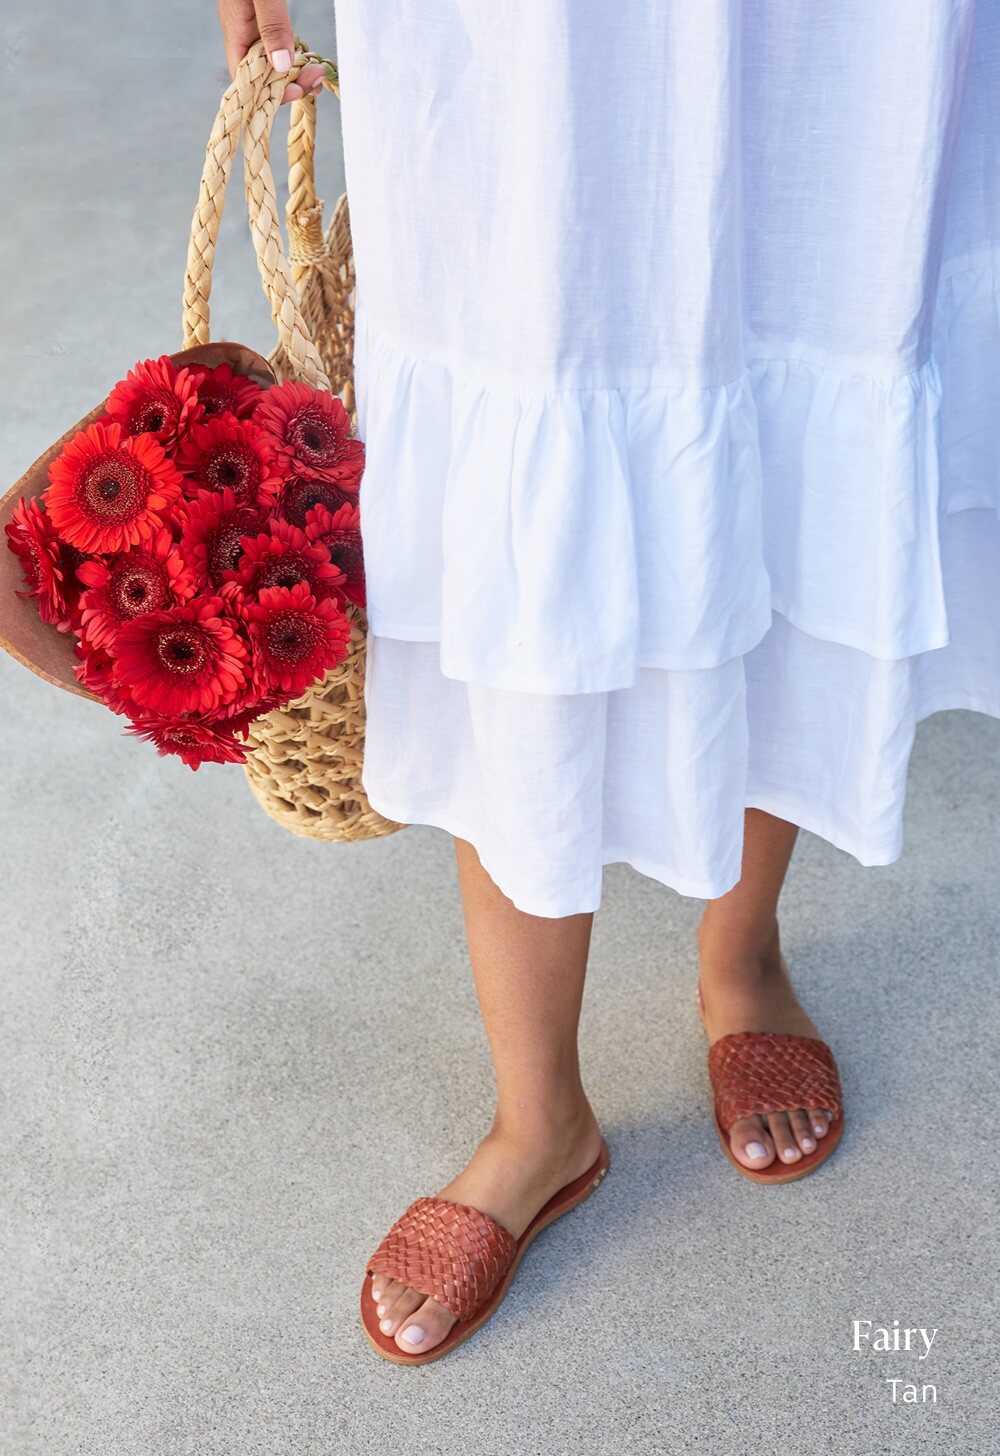 Woman wearing Fairy woven leather slide sandals in tan with white dress, holding flowers.